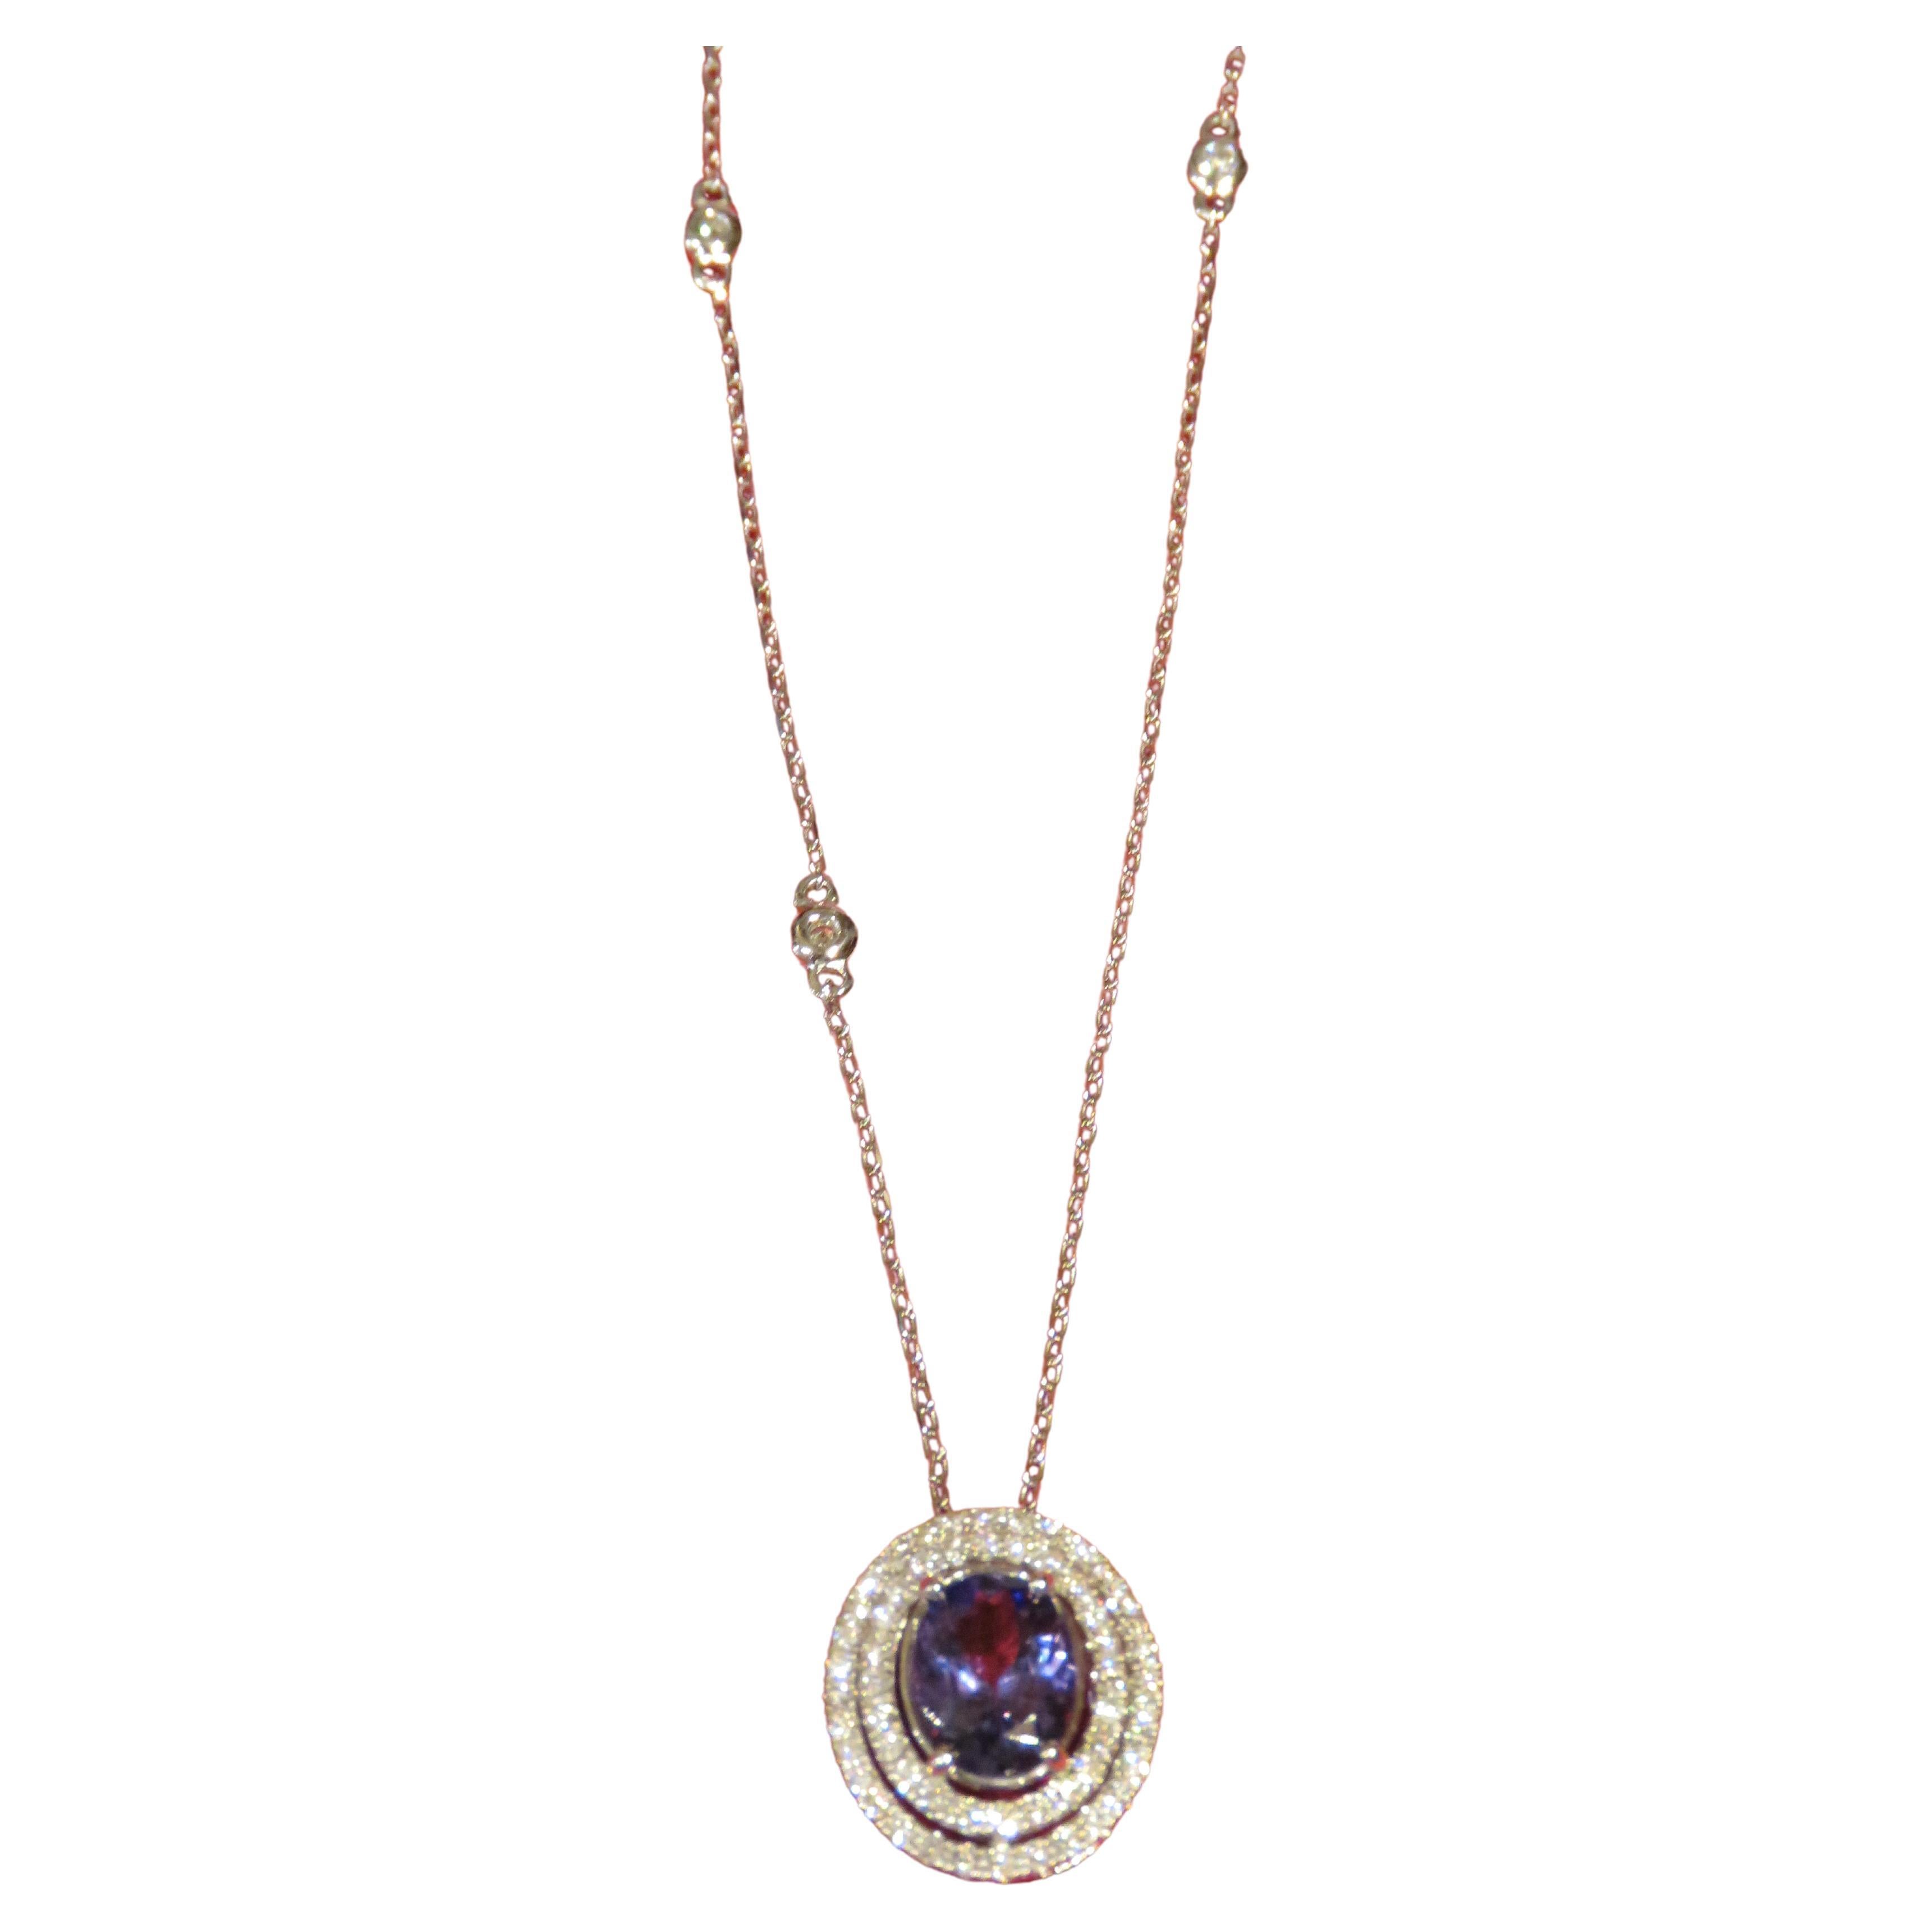 NWT $4, 000 Rare Gorgeous 18KT Gold Fancy Tanzanite and Diamond Pendant Necklace For Sale